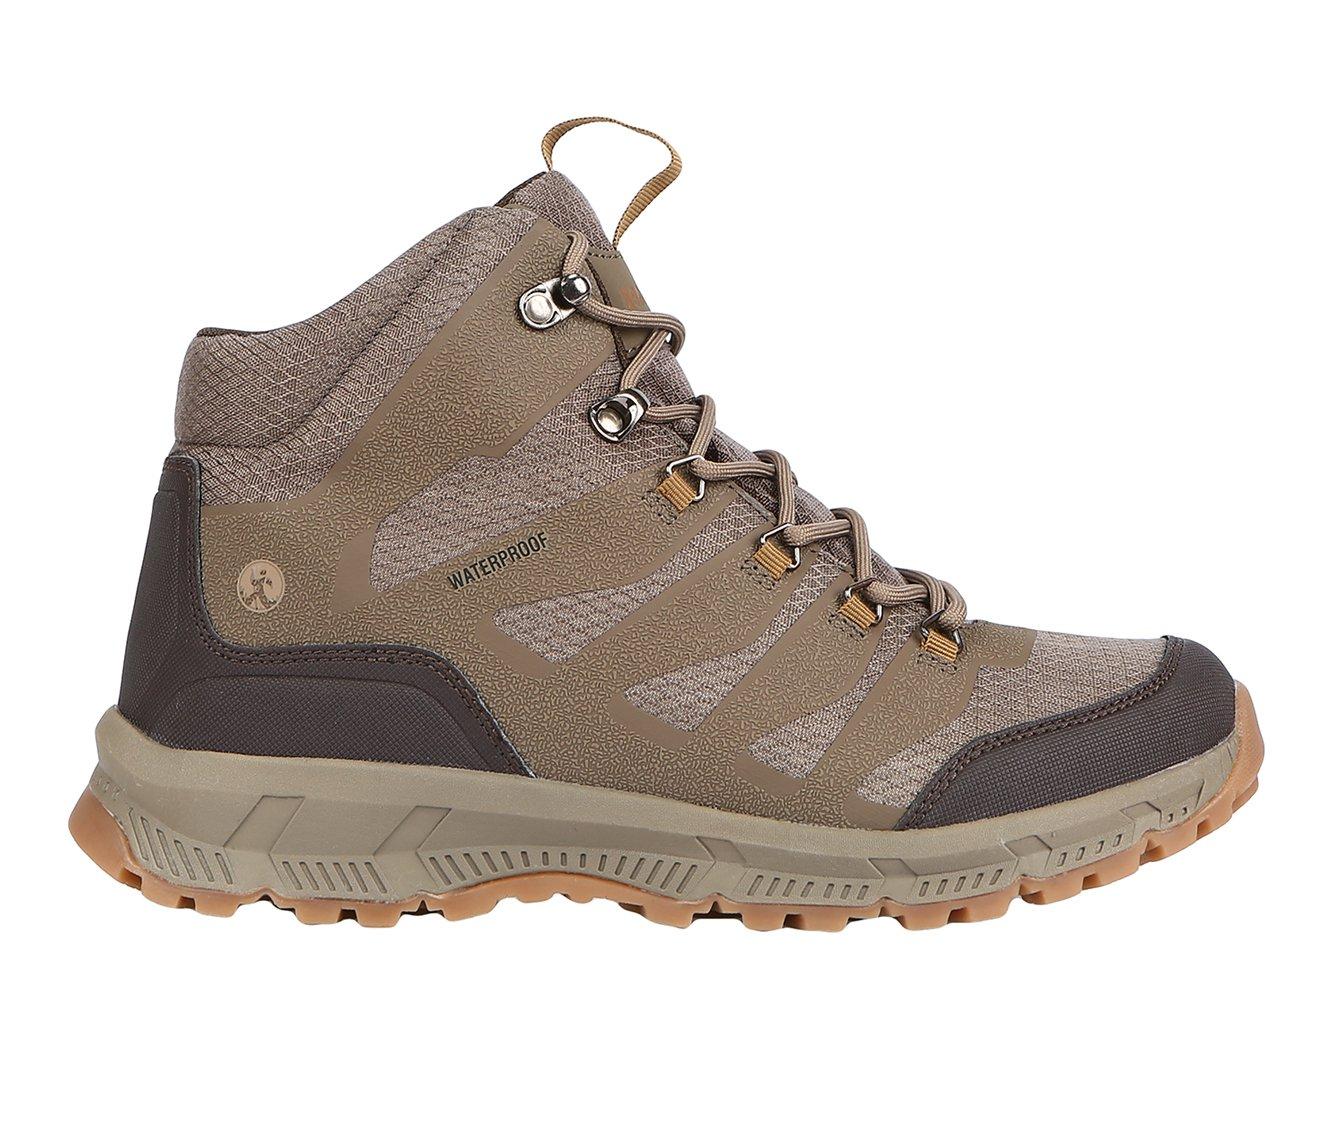 Men's Northside Hargrove Mid Hiking Boots